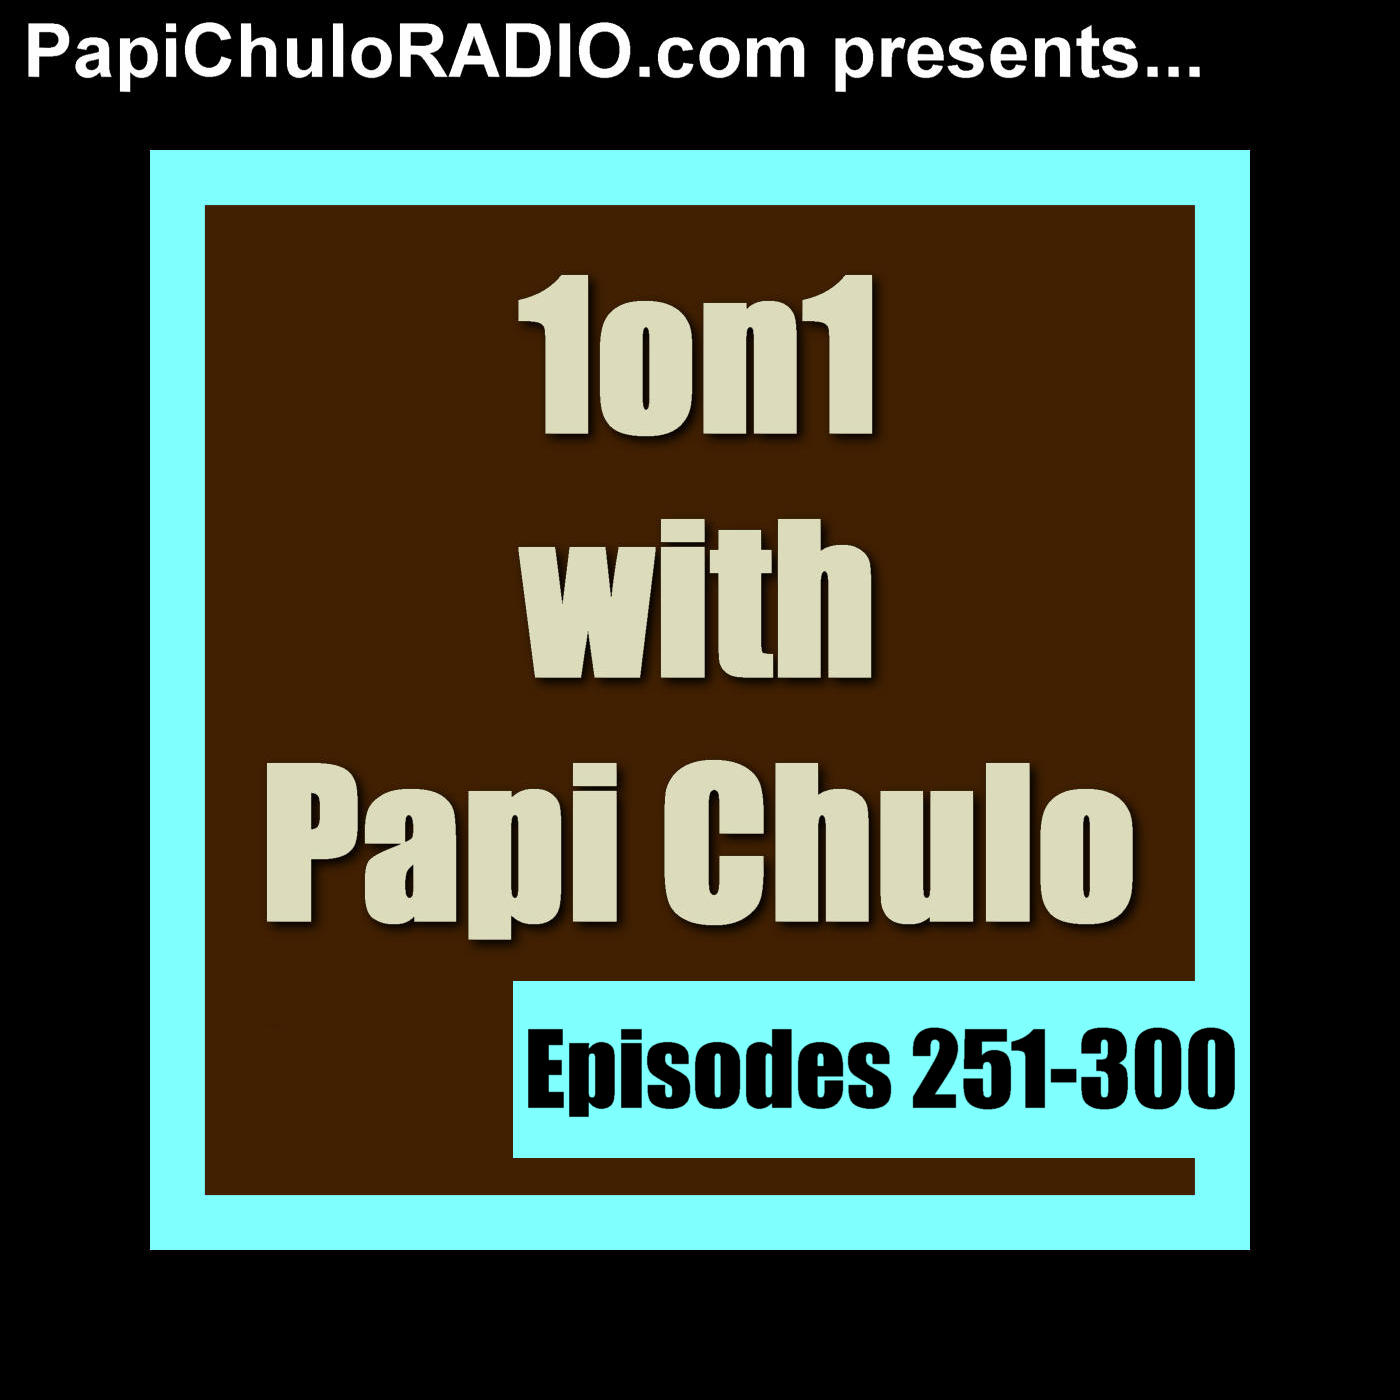 1on1 with Papi Chulo [Episodes 251-300] Podcast artwork